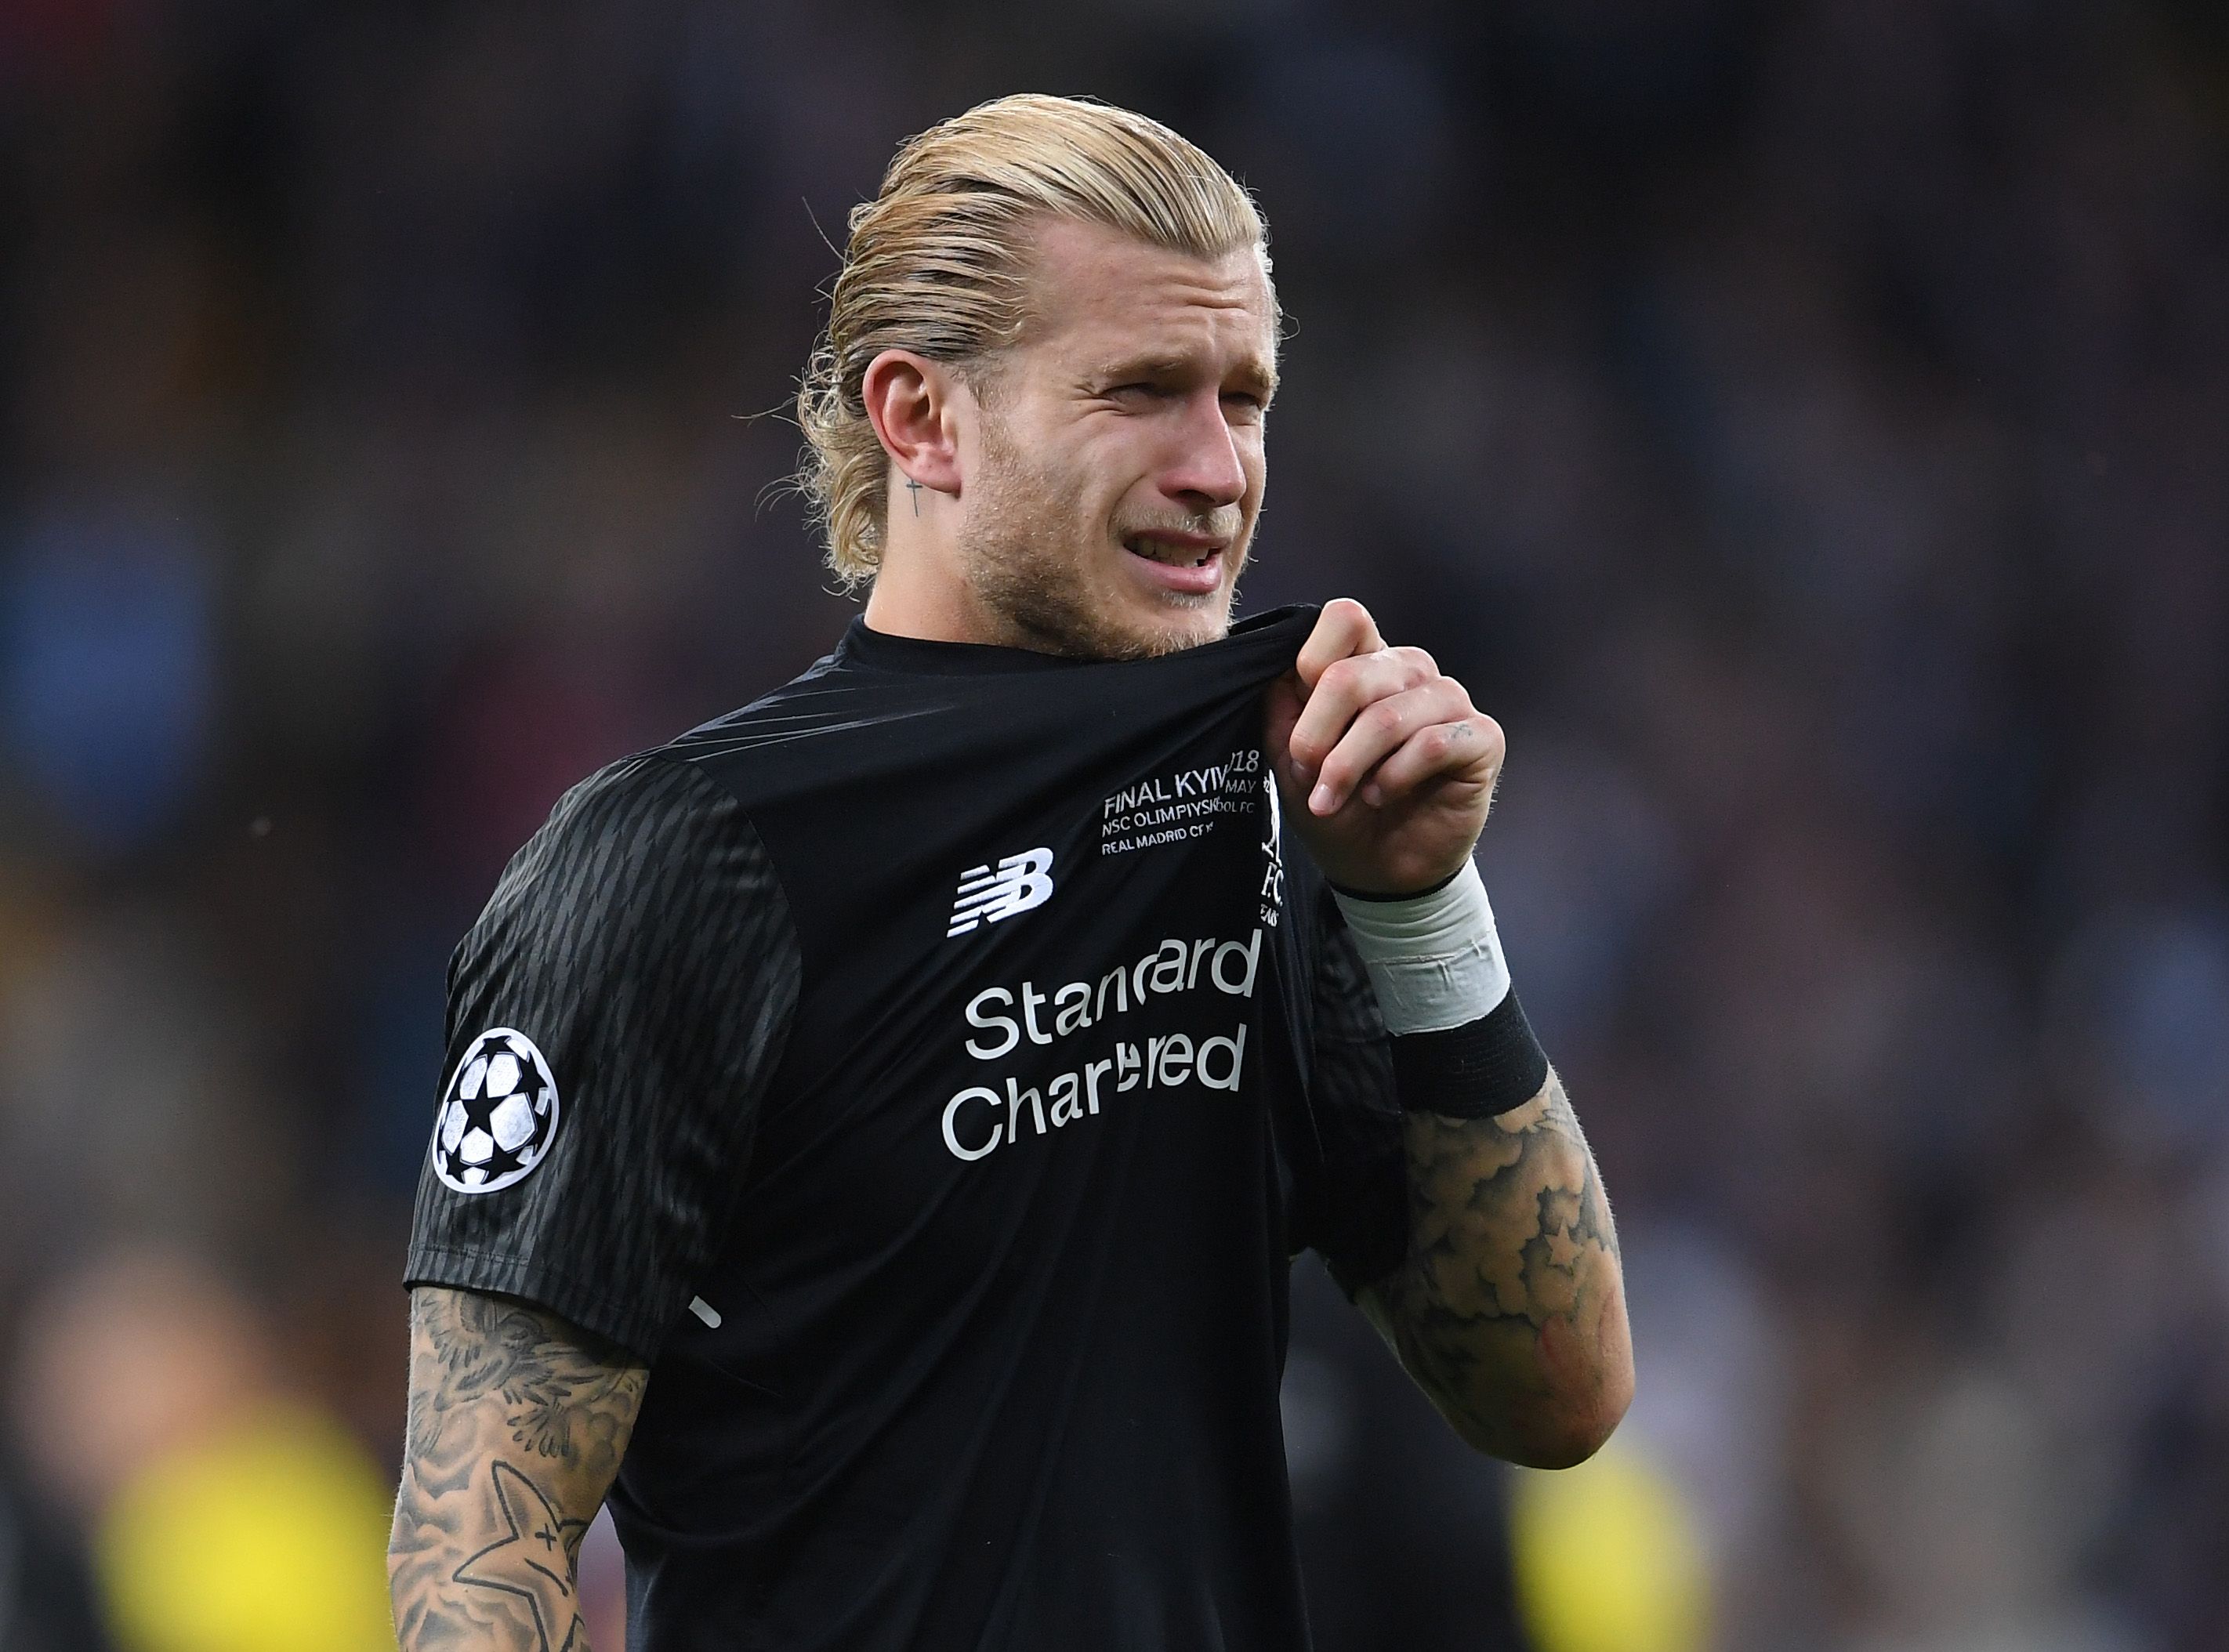 Karius after the 2018 Champions League final